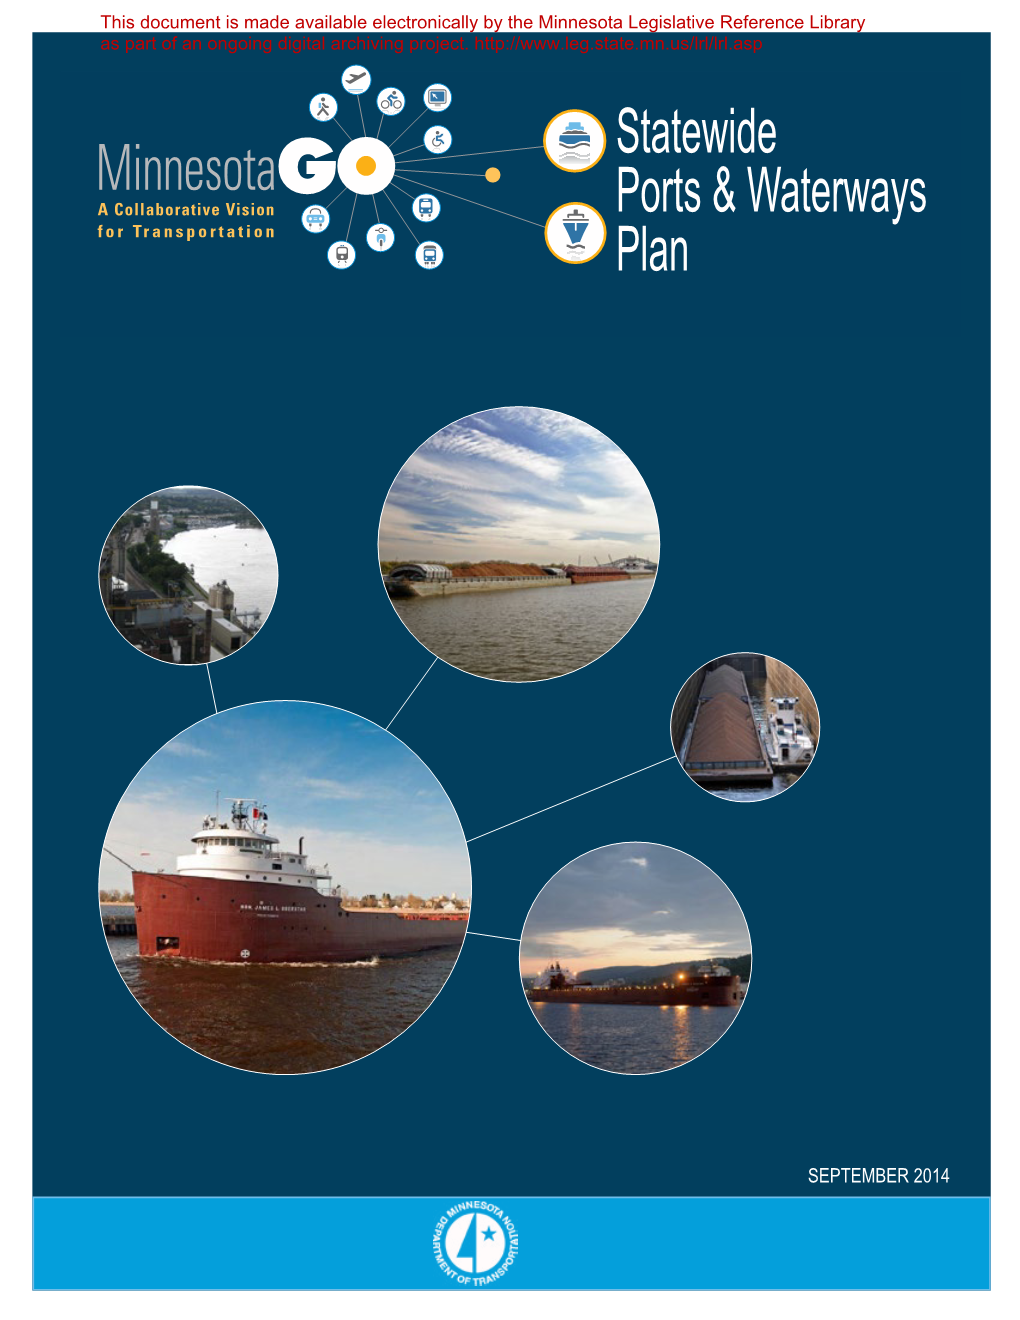 Statewide Ports and Waterways Plan for 2013-2033